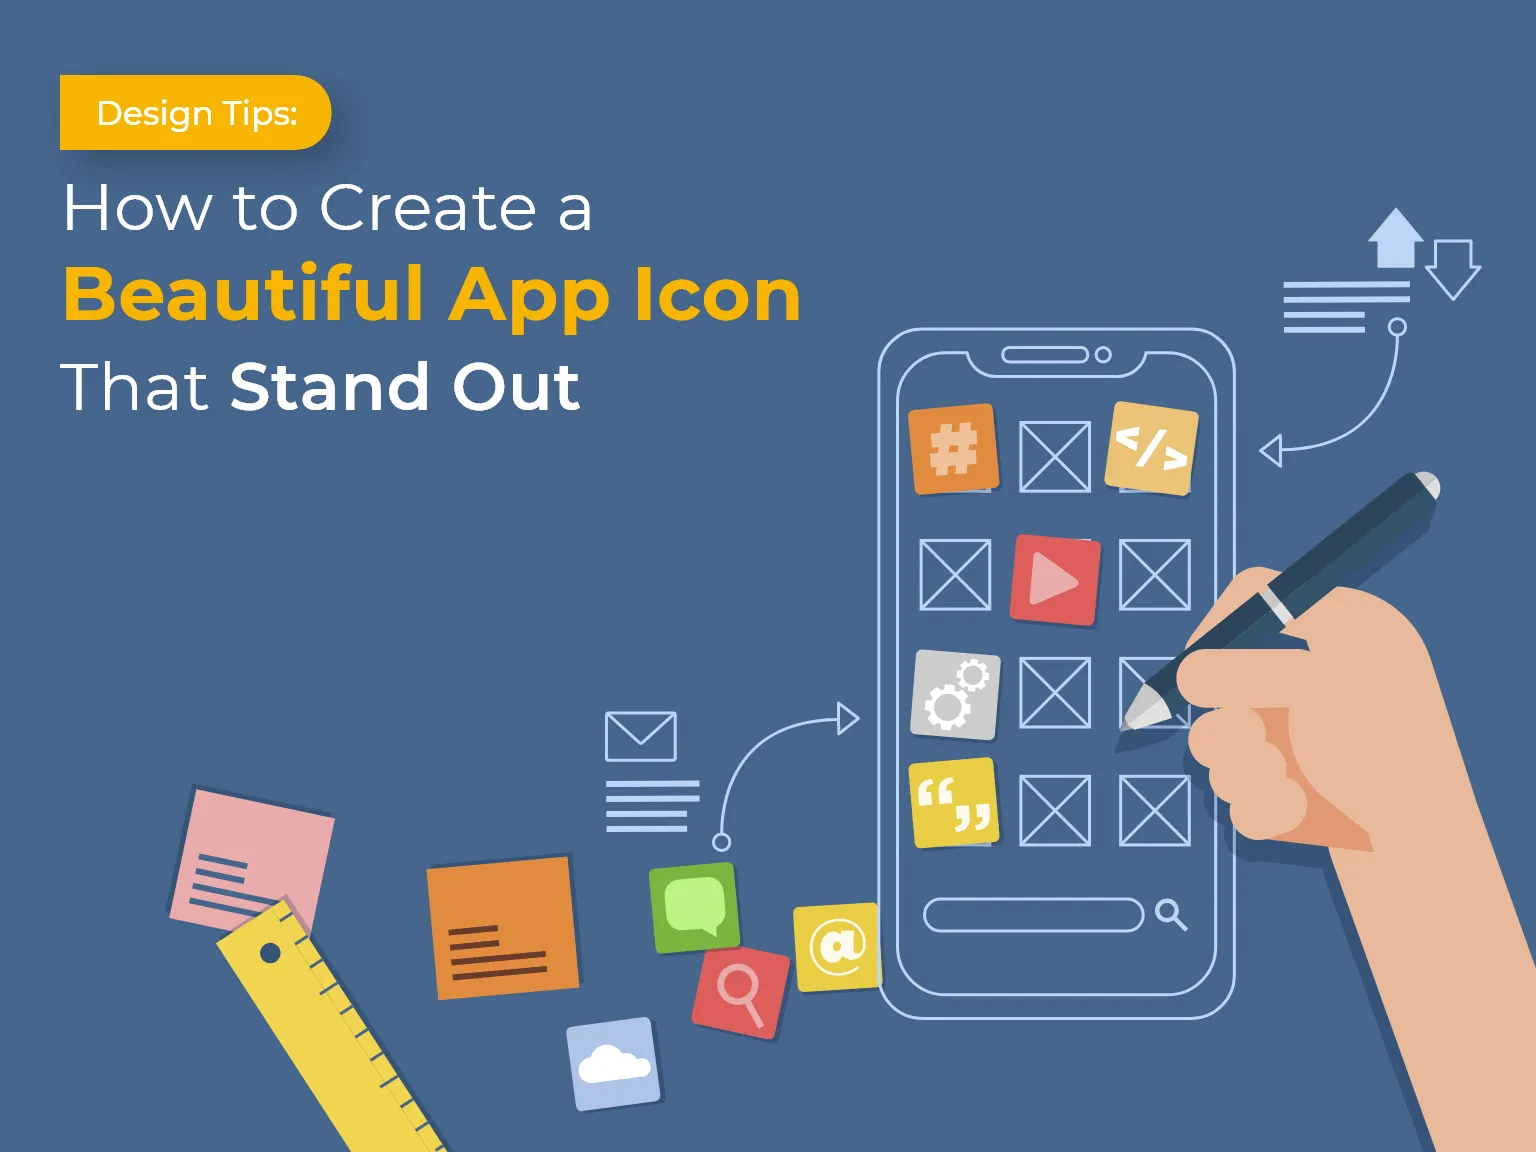 How to Design a Beautiful Mobile App Icon